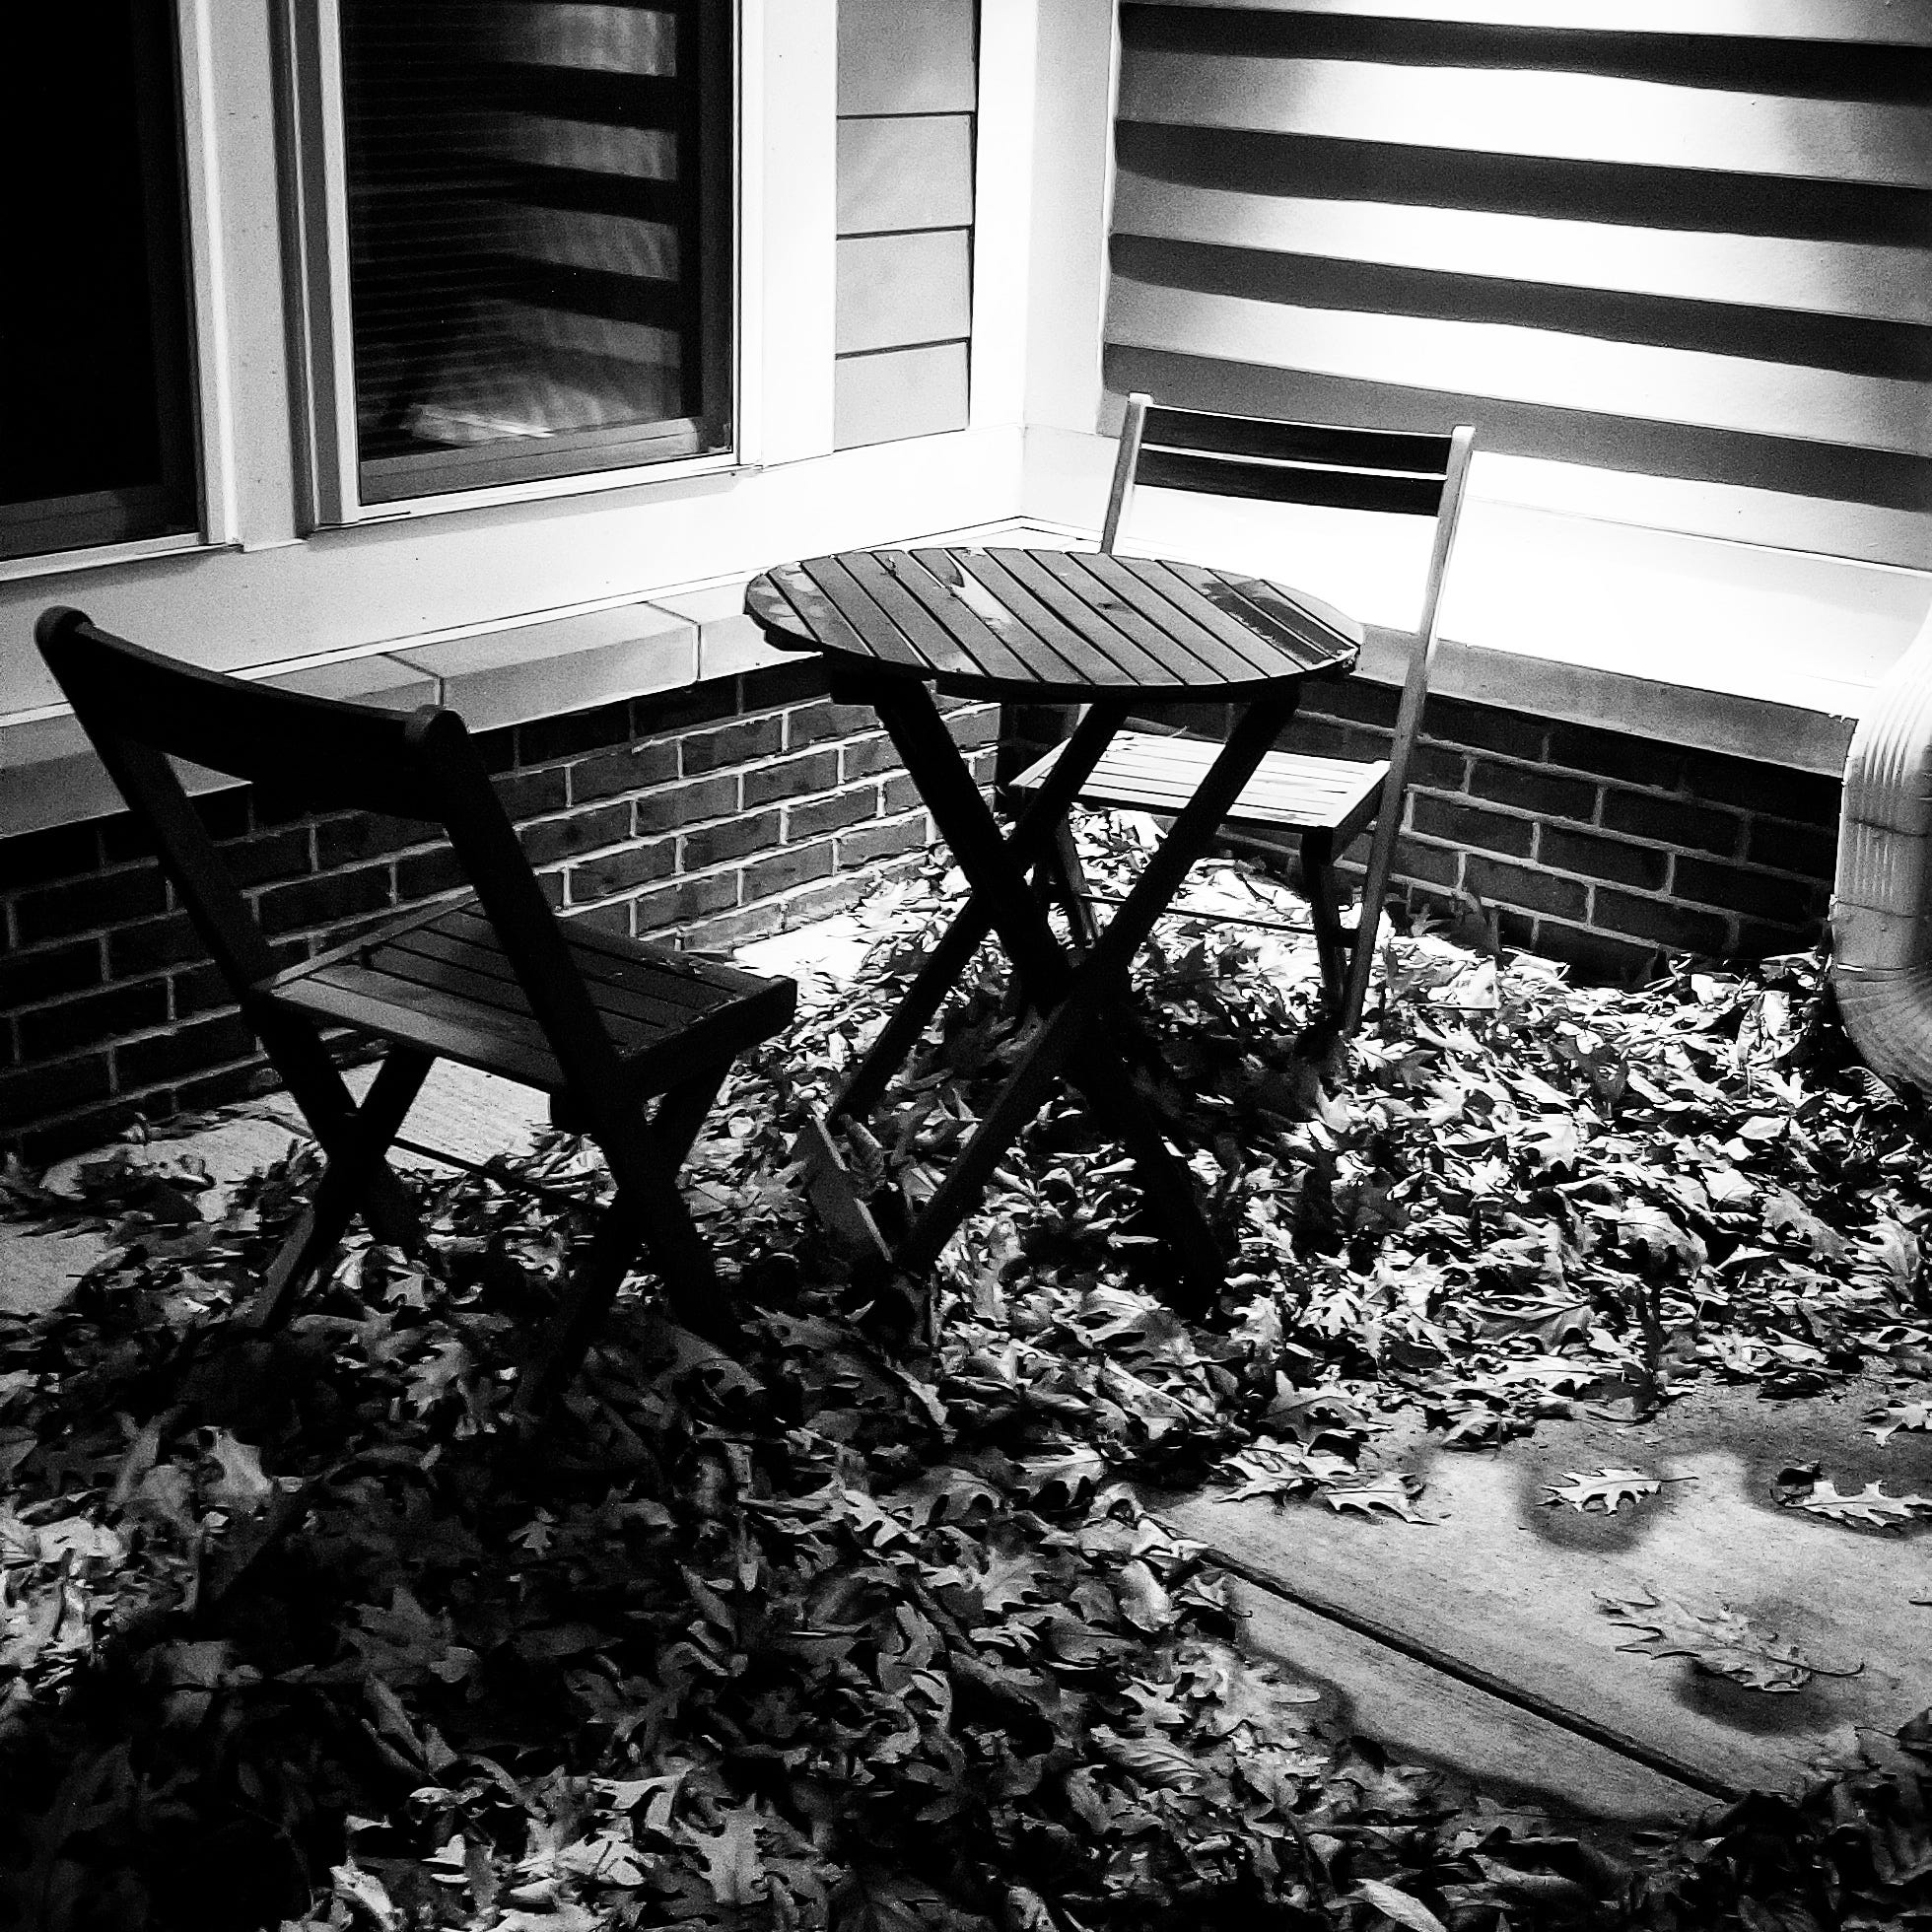 Outside Seating - image by Shawn R. Metivier, 2020